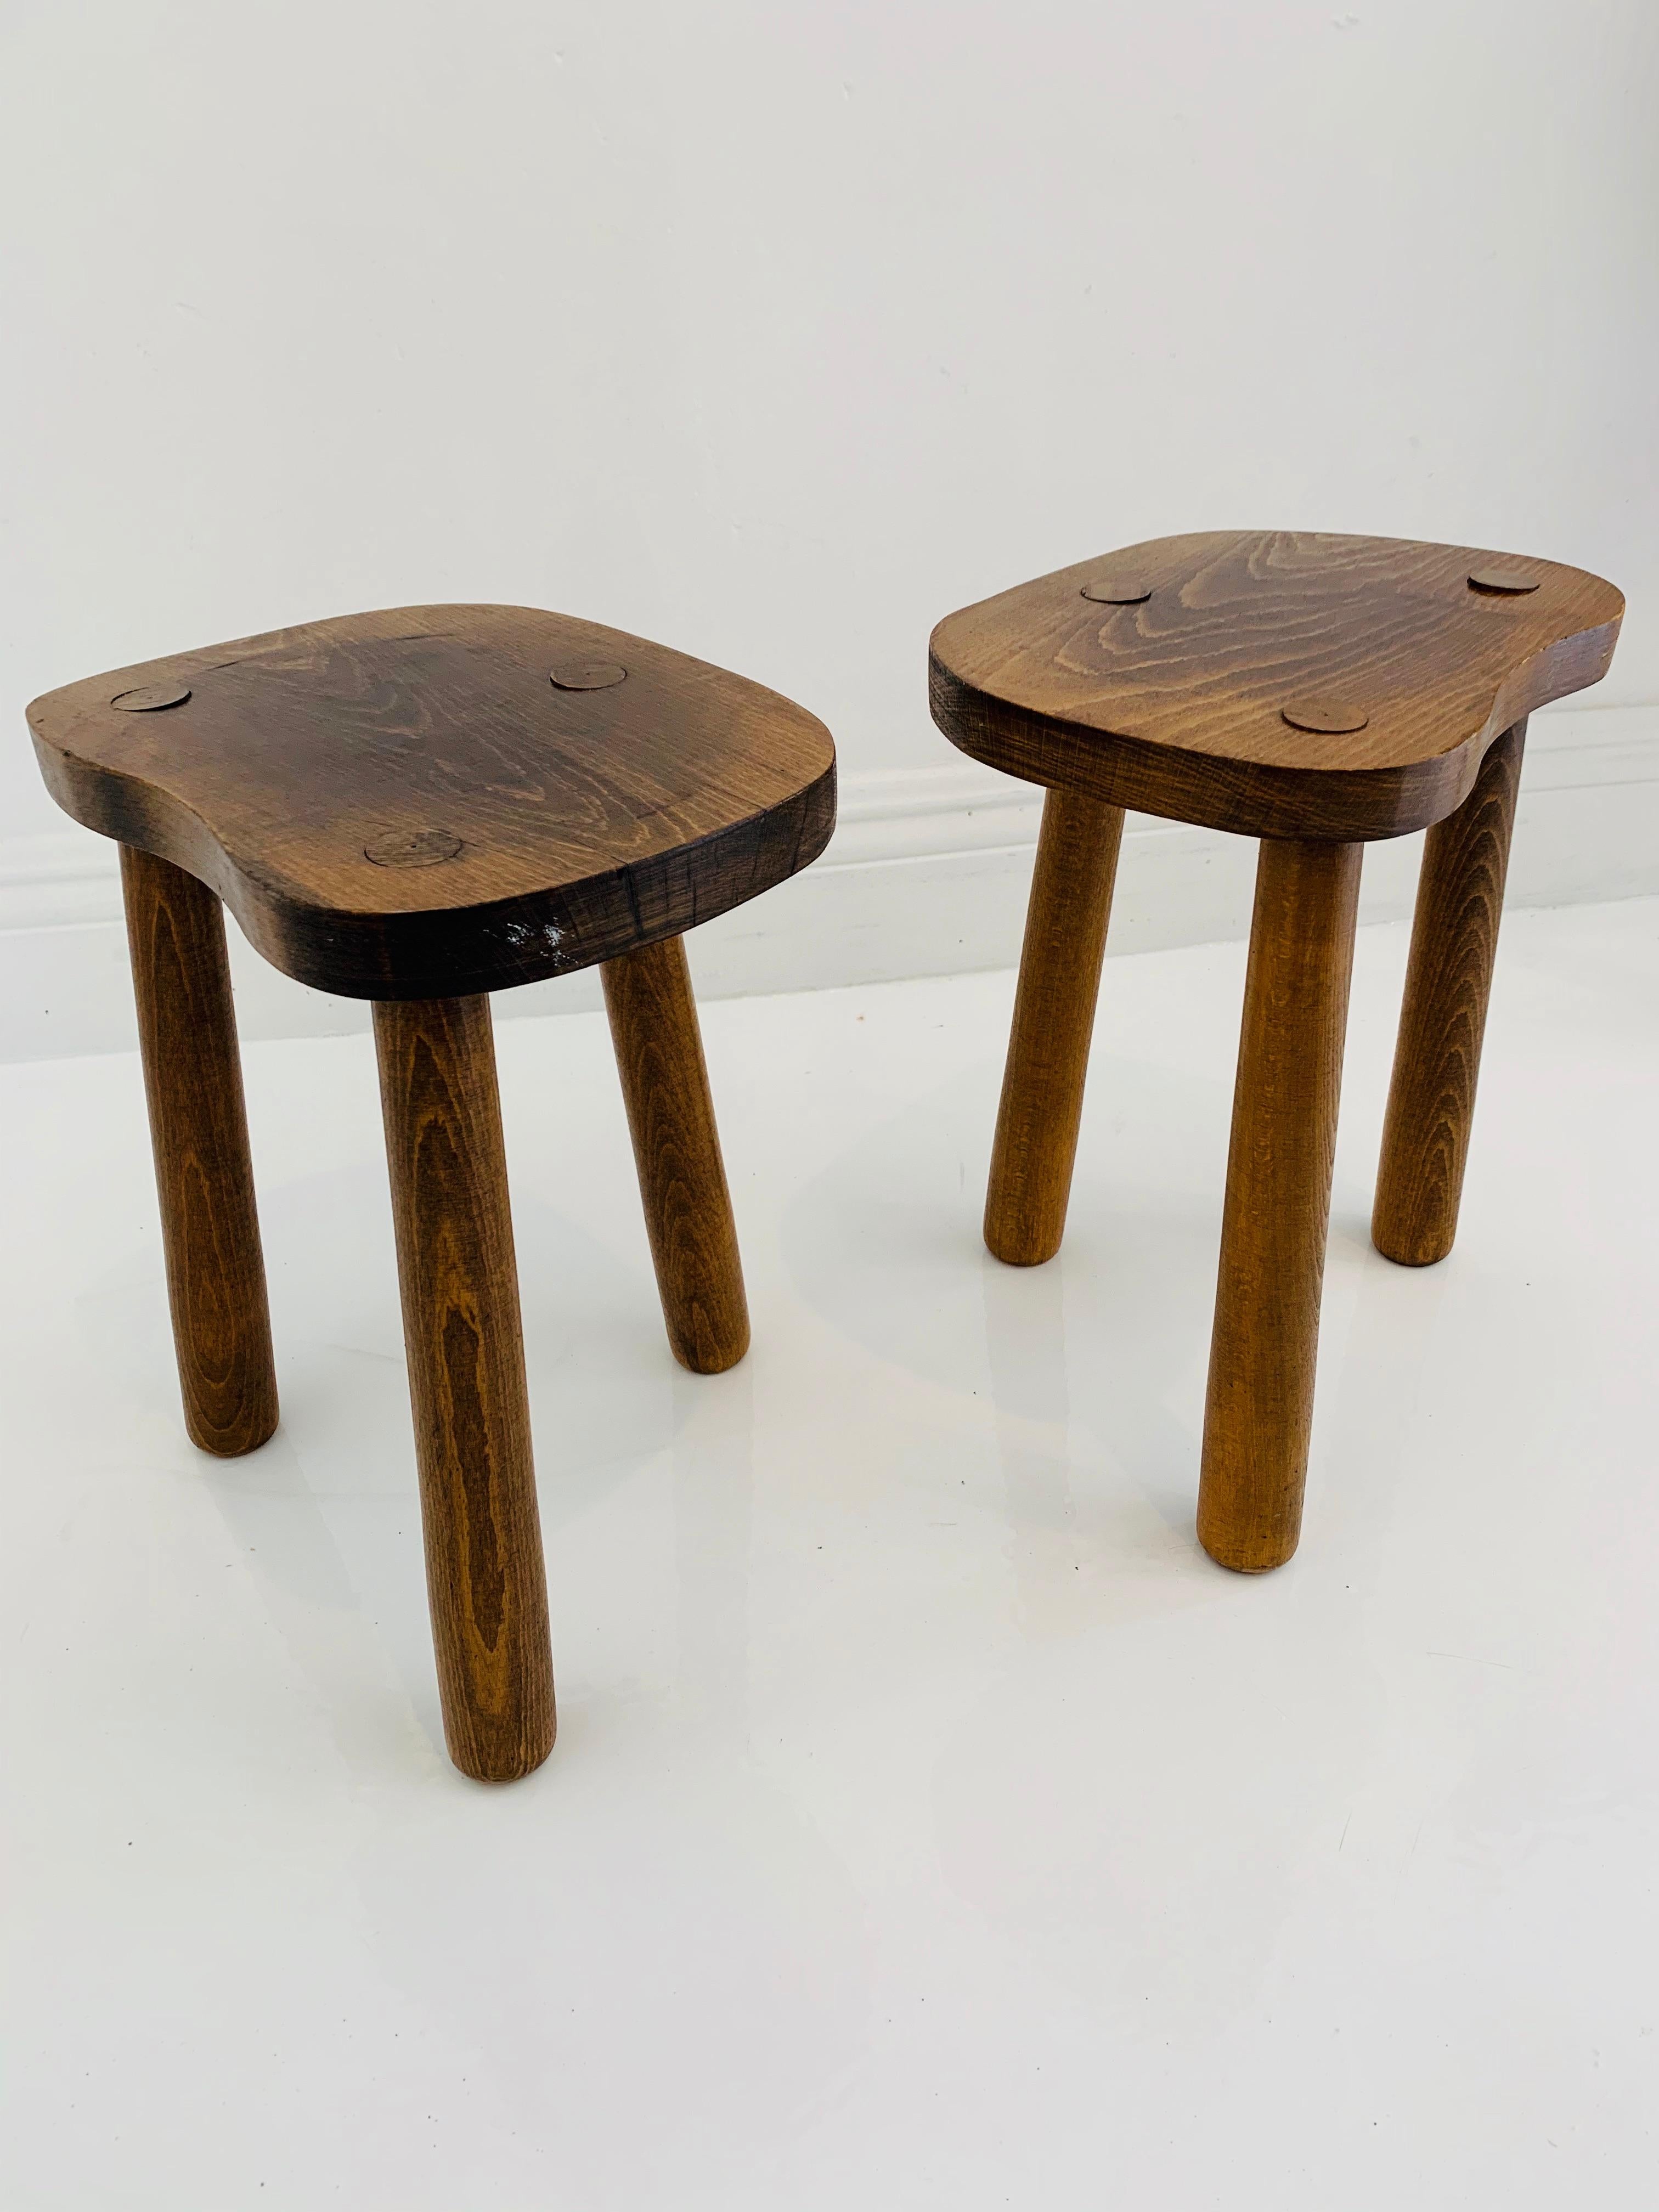 Vintage wooden milking stools made in France, circa 1950s. Thick seat with tripod legs. No nails or hardware. Great lines and shape. Petite stool with great presence. Great vintage condition. Two available. Priced individually.
 